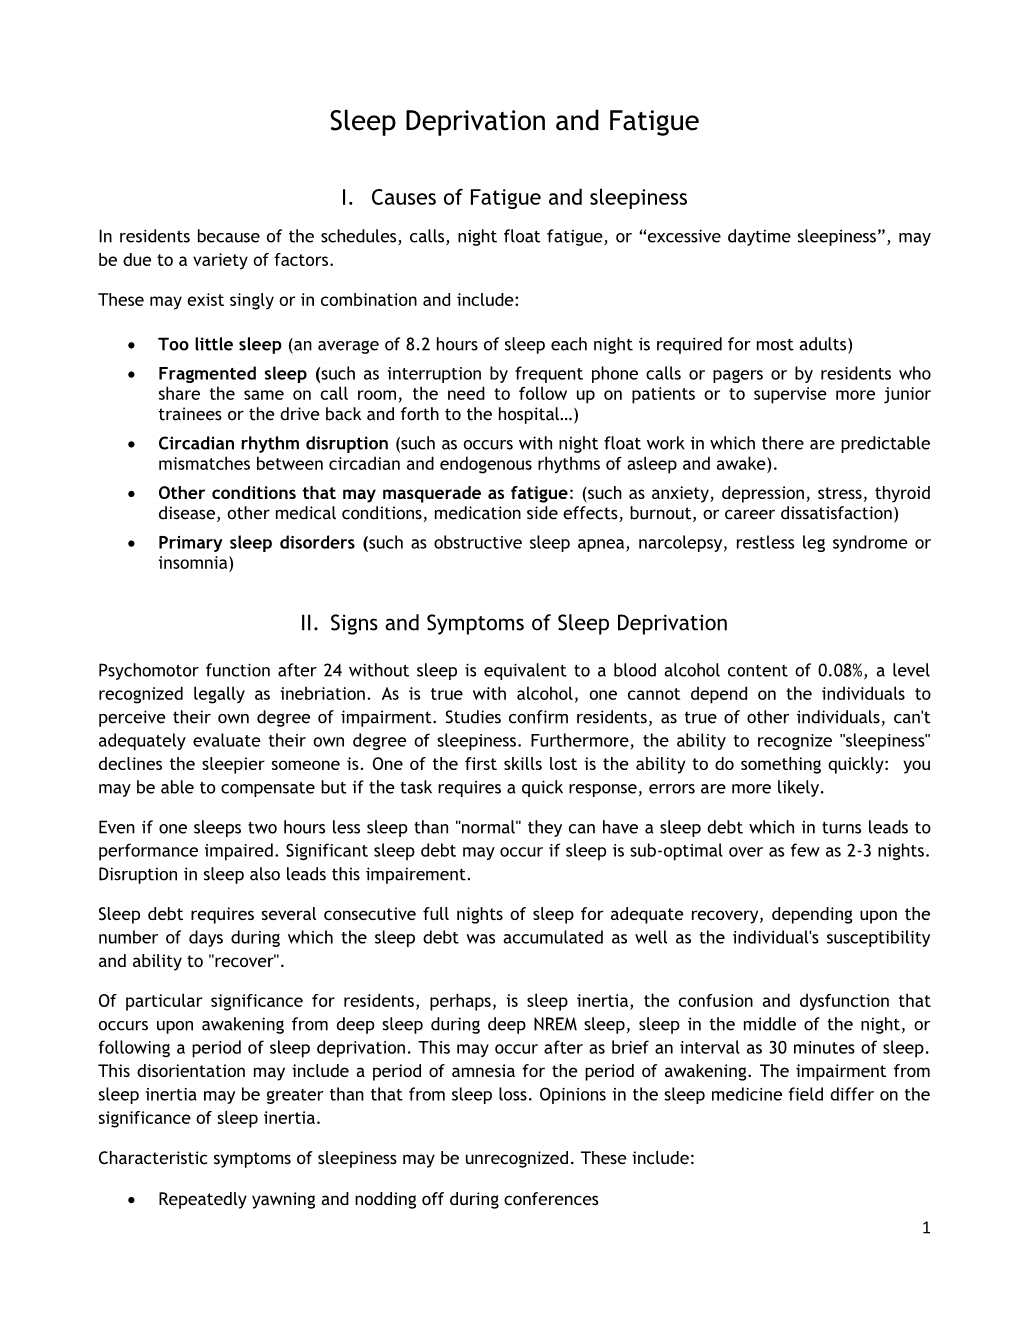 Handout on Sleep Deprivation and Fatigue